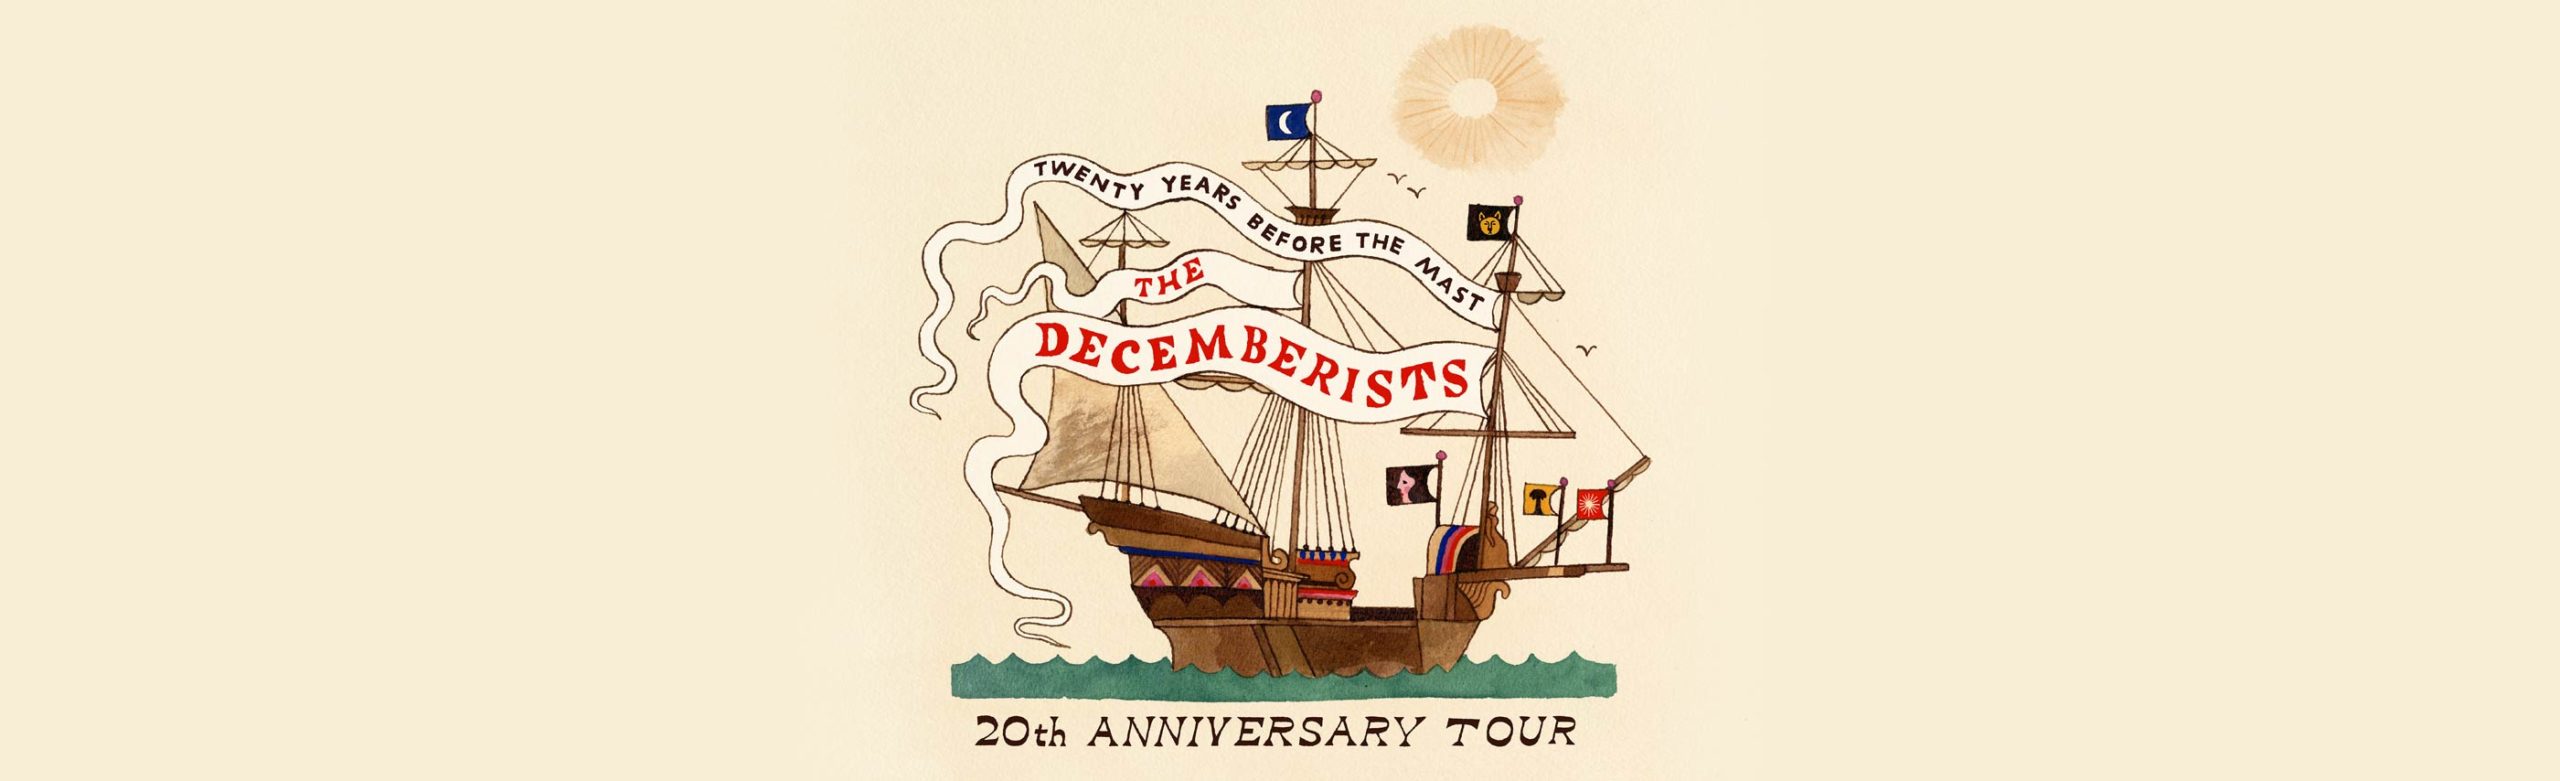 CANCELED: The Decemberists: 20 Years Before The Mast